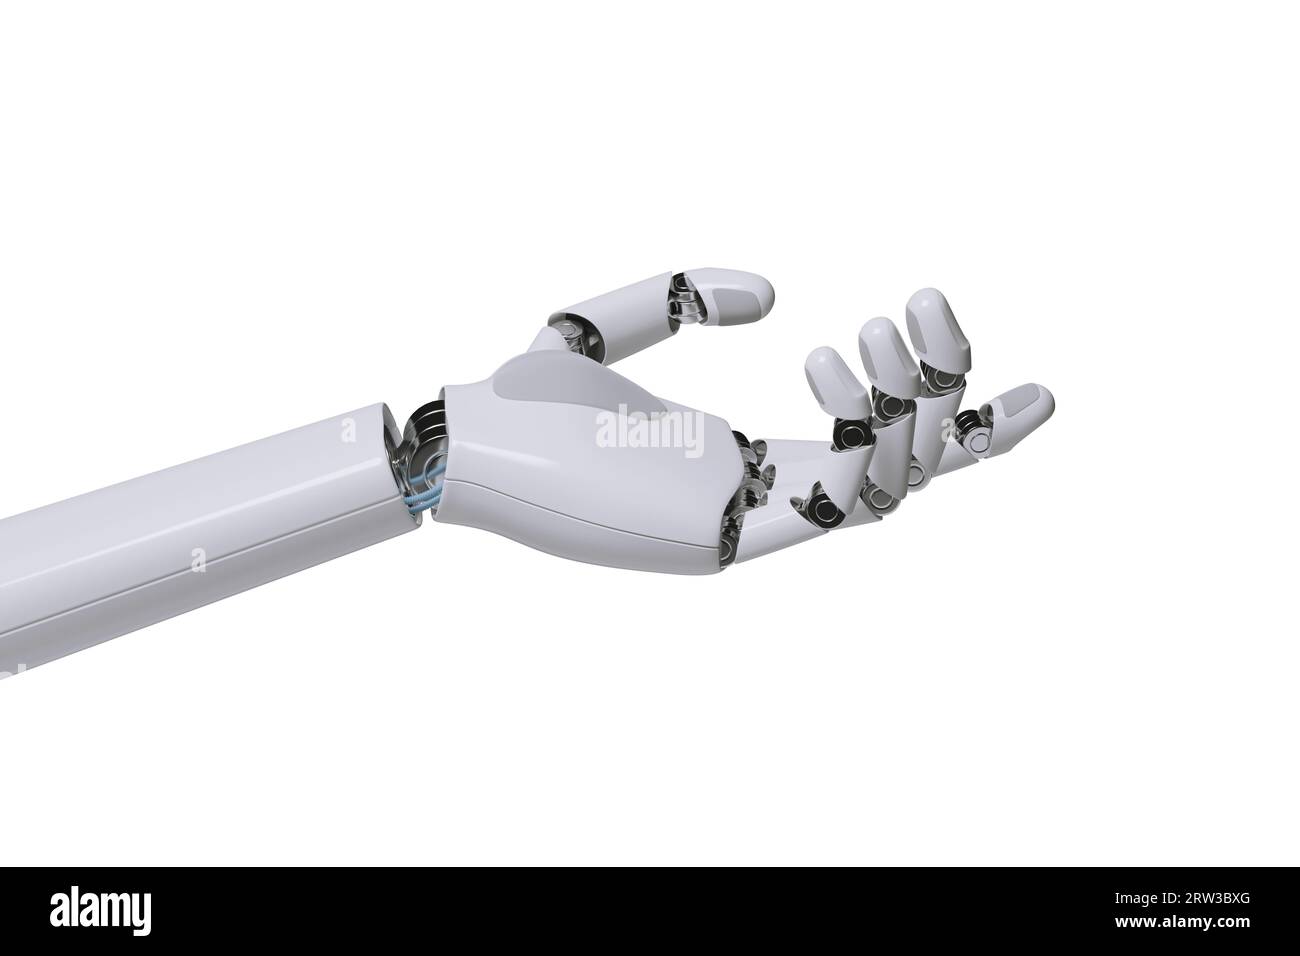 Robotic hand with palm up isolated on white background. 3d illustration. Stock Photo